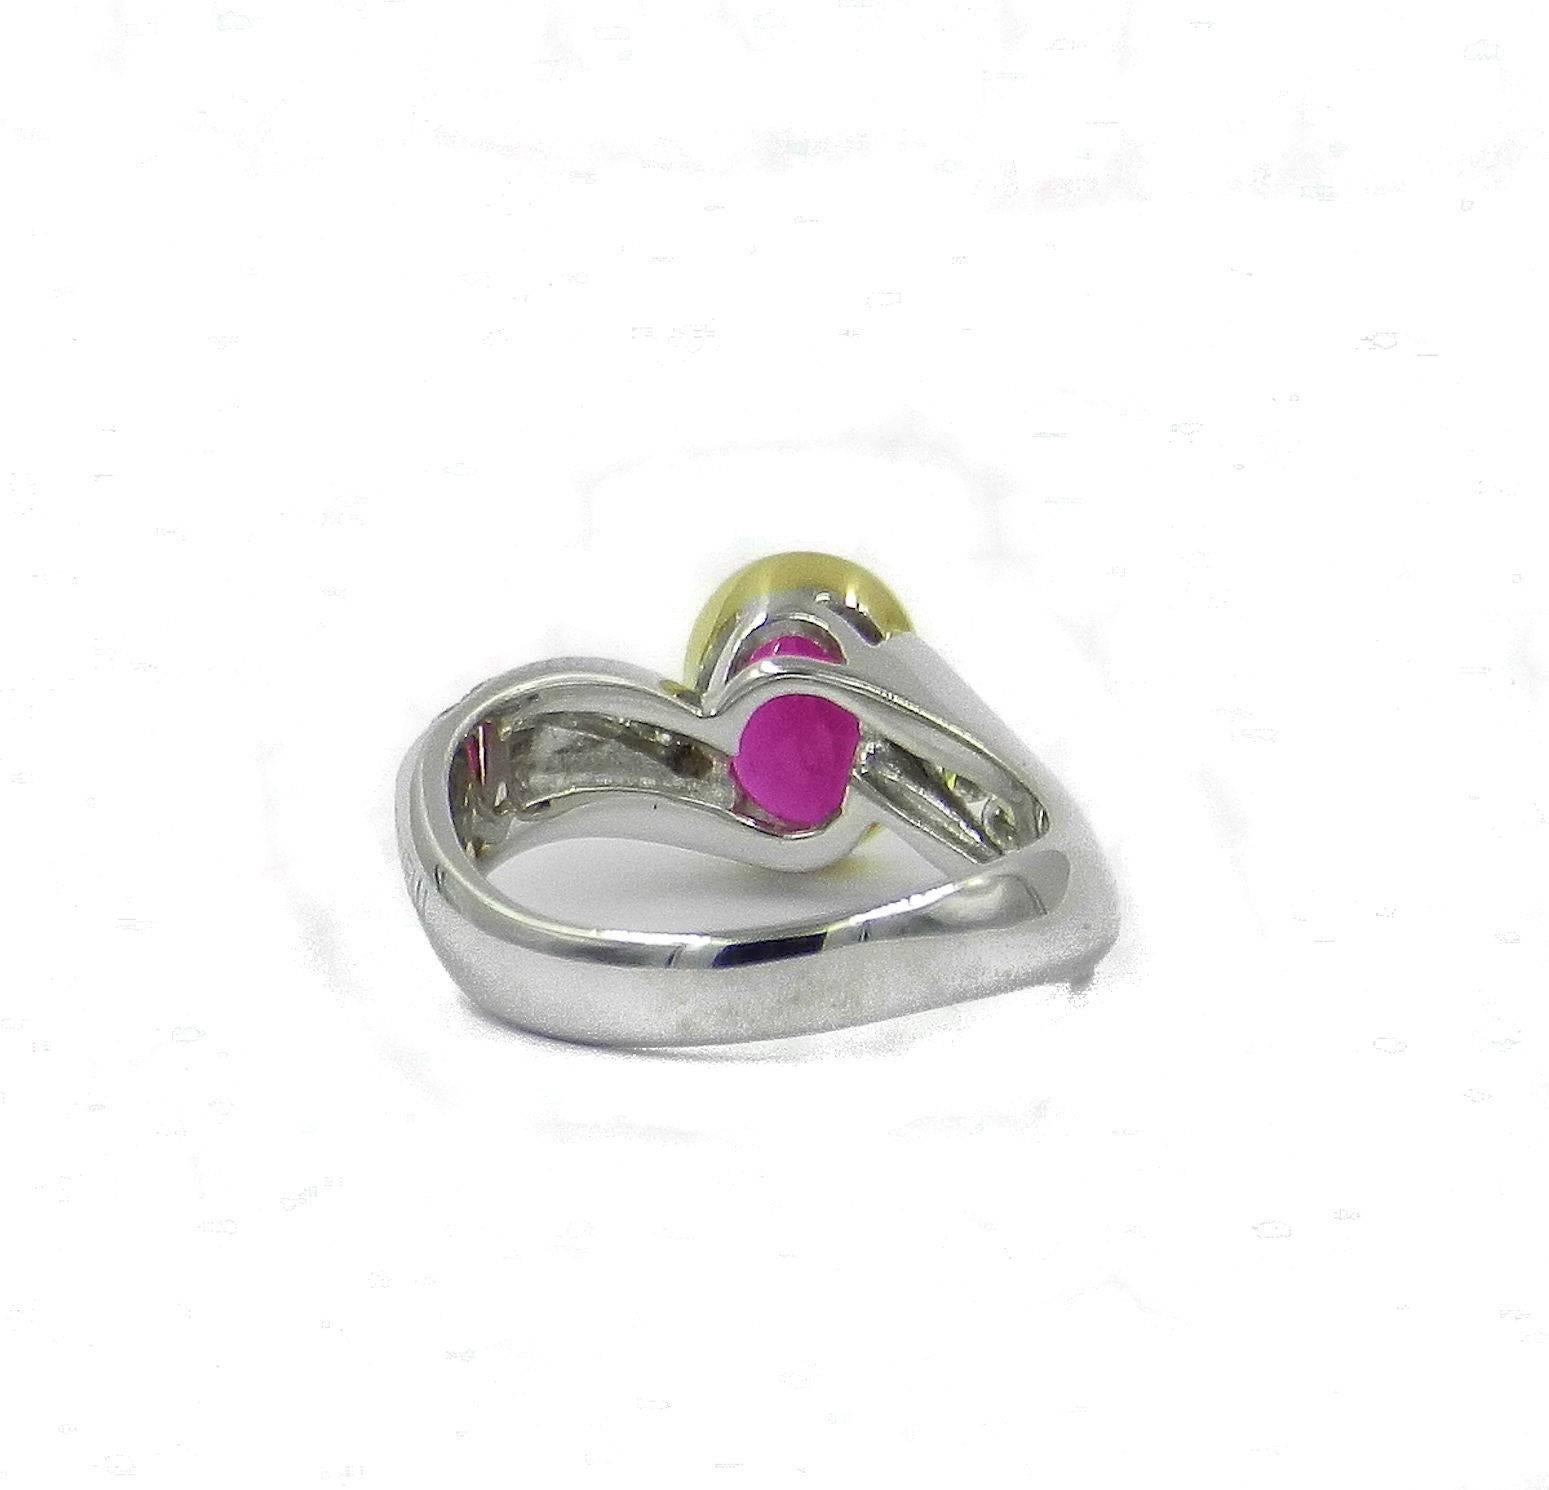 Ring in 18kt white gold with a very nice red color ruby, oval shape, weight carats 1.38 . The ring has round diamonds on the shank for a total carat weight of 0.38 
A ring that should be considered because it's wearable all time and for the value.